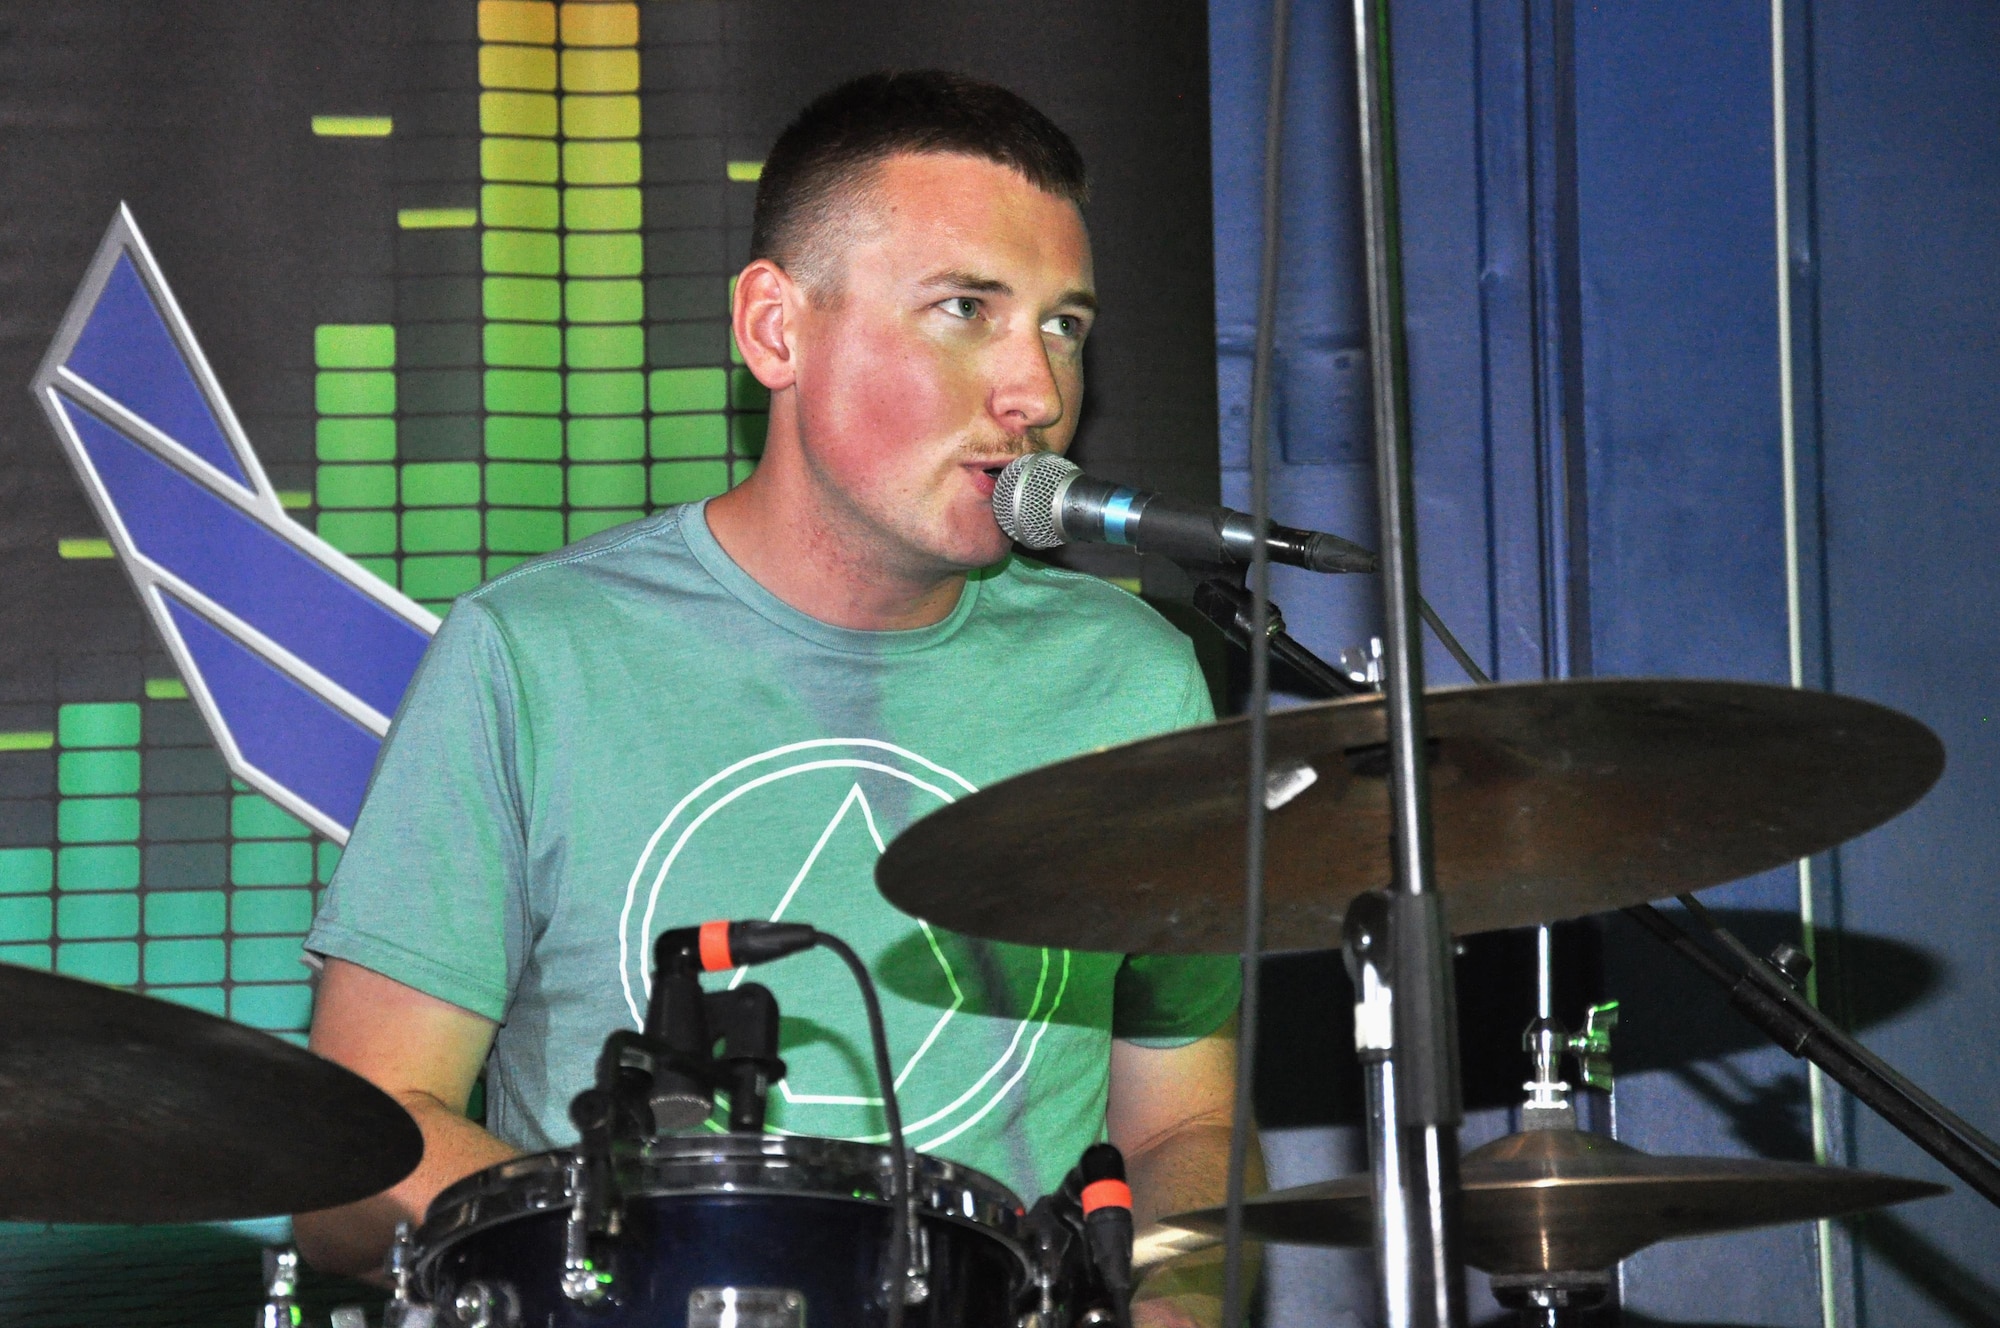 Airman 1st Class Joshua Dick, drummer and social media manager for the AFCENT Band, sings and drums during a song at the Starlifter Memorial Day concert Monday, May 29, 2017, at an undisclosed location in Southwest Asia. (U.S. Air Force photo/Master Sgt. Eric Sharman)